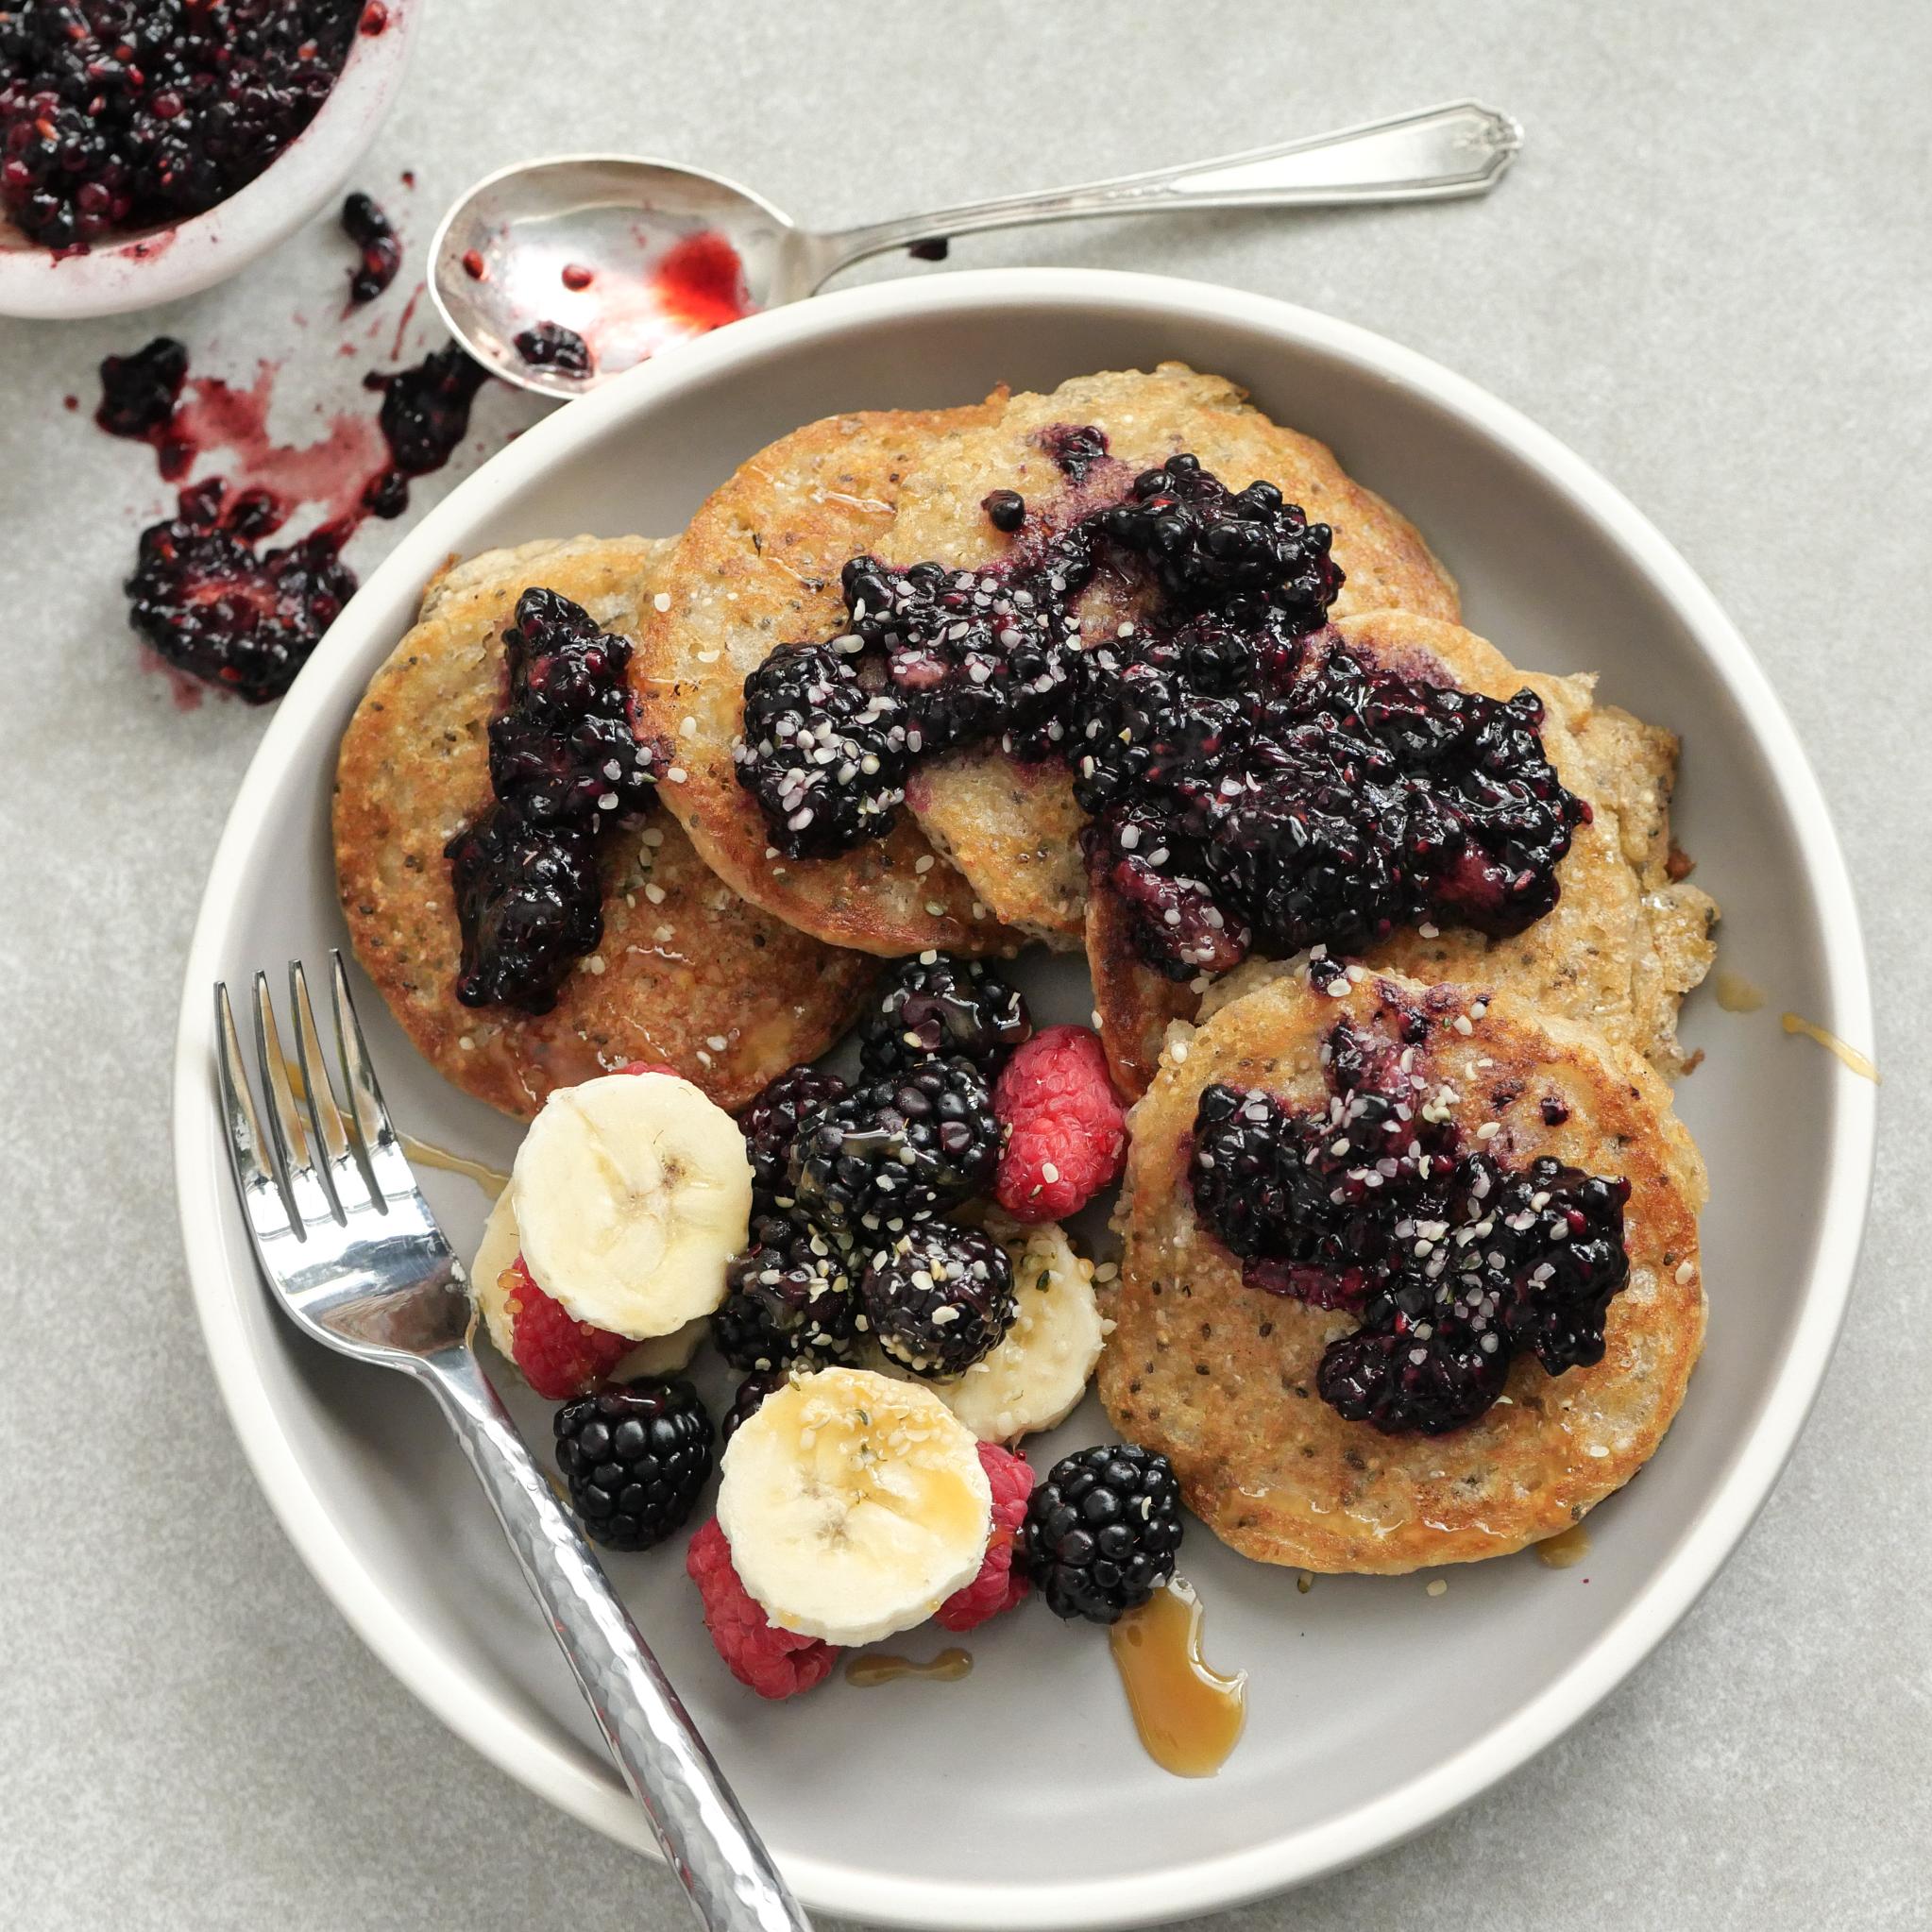  Is there anything better than pancakes? How about healthy pancakes that taste amazing?